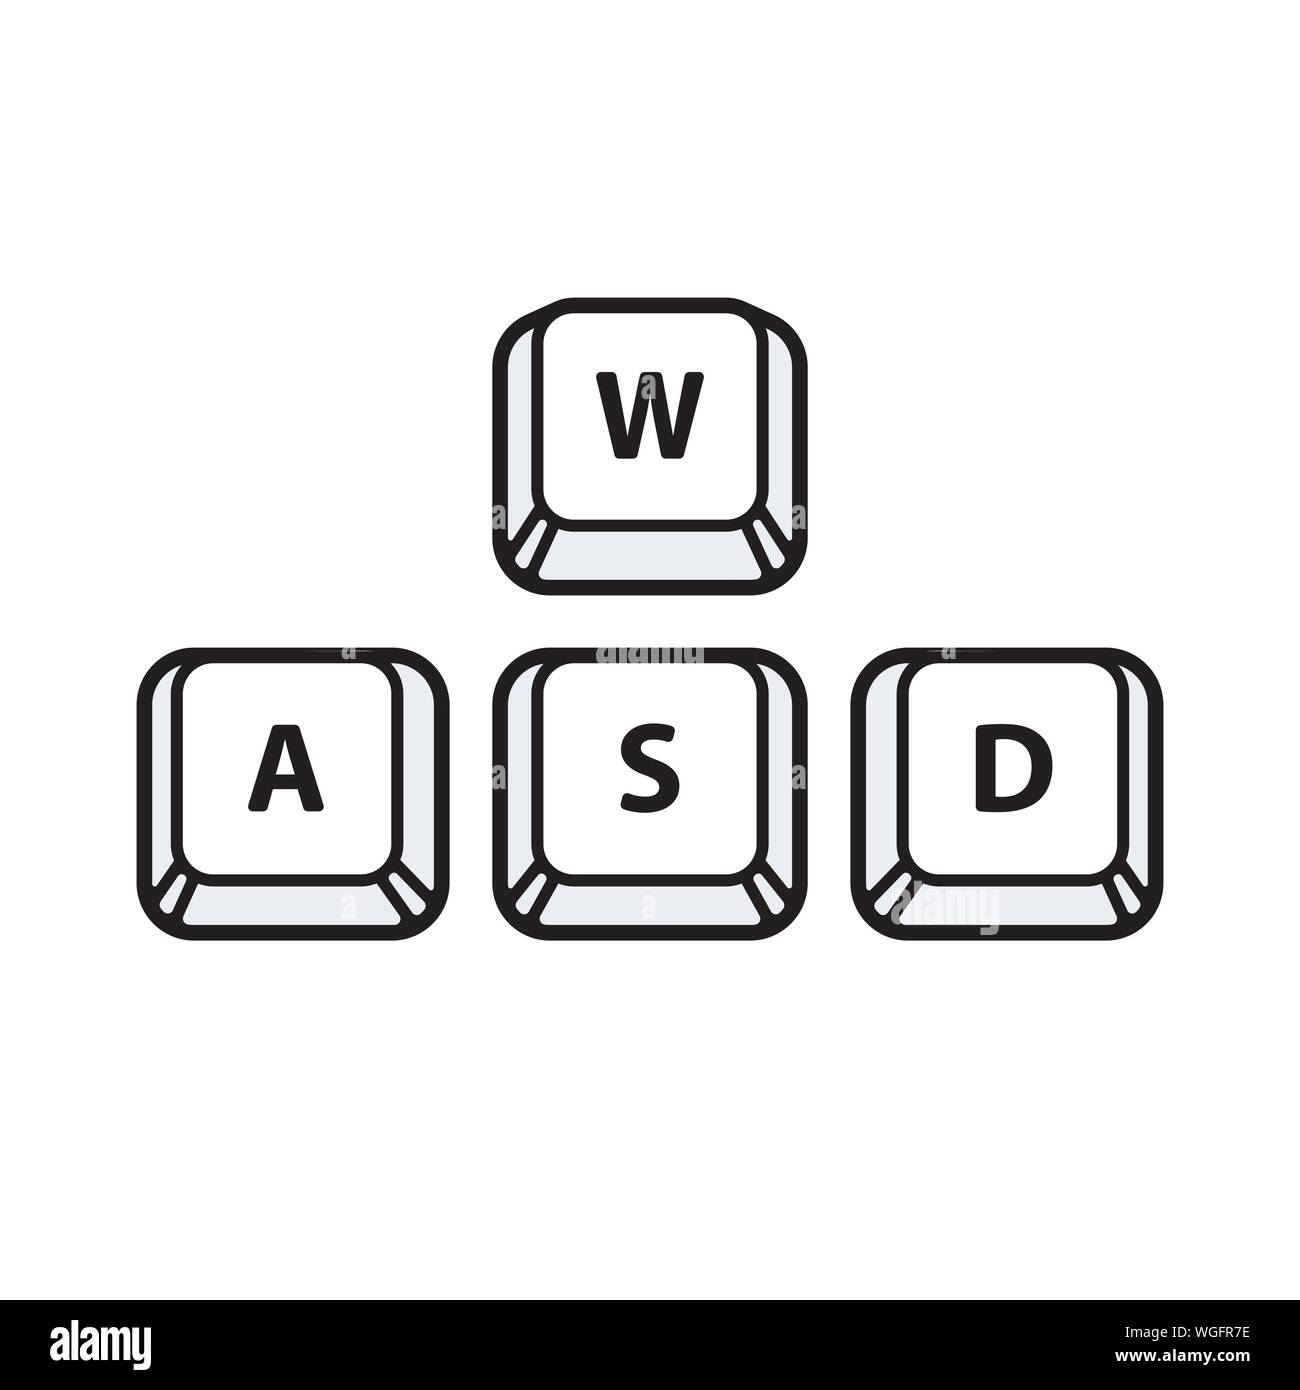 WASD keys, game control keyboard buttons. Gaming and cybersport symbol. Vector illustration. Stock Vector